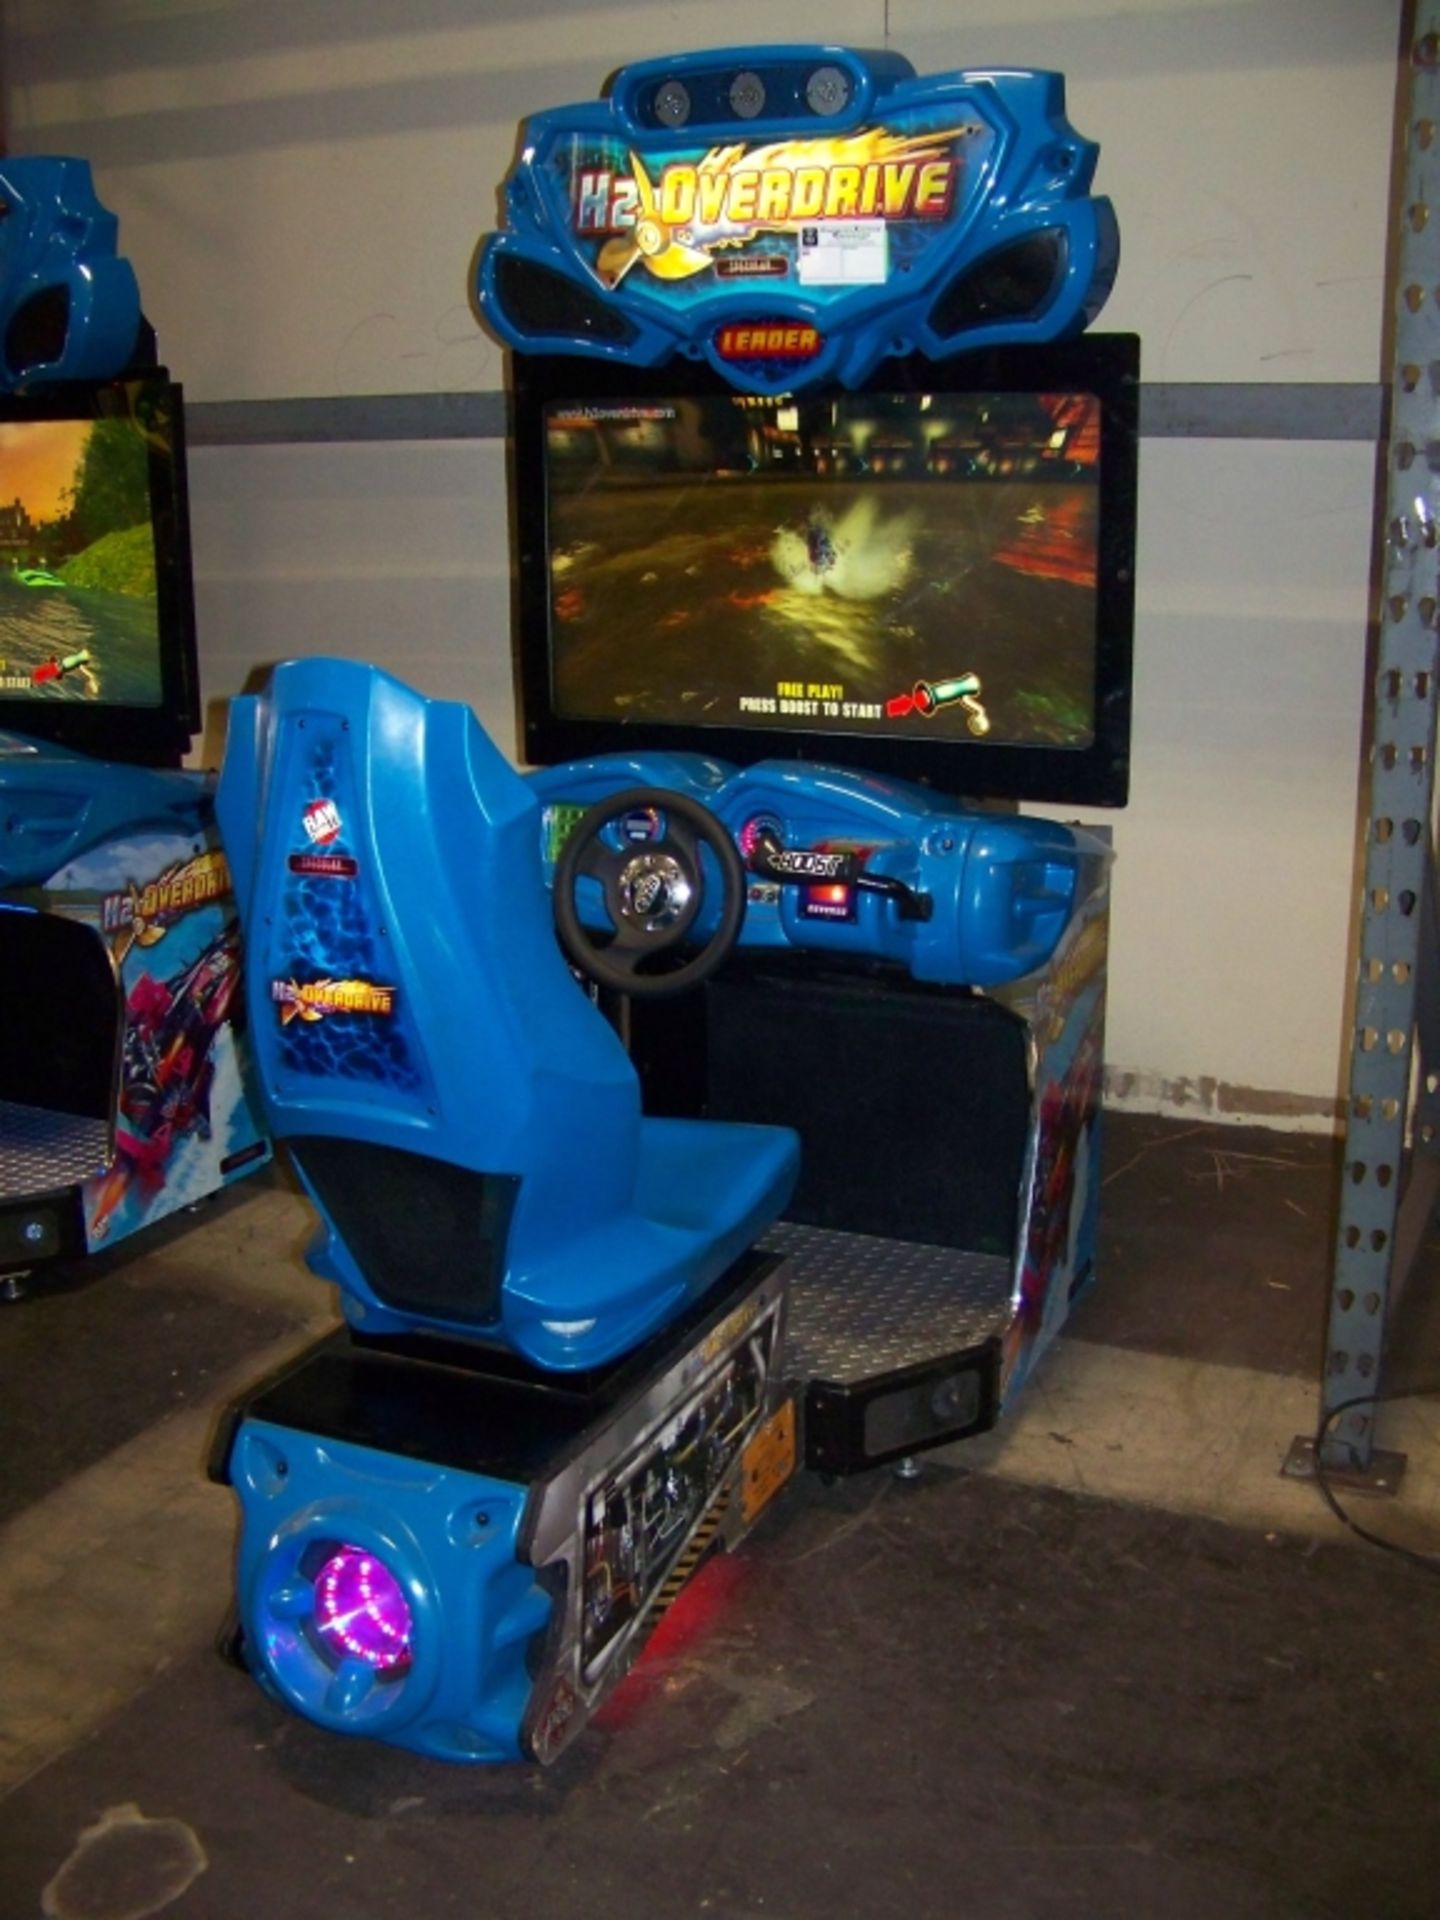 H2 OVERDRIVE 42"" LCD RACING ARCADE RAW THRILLS